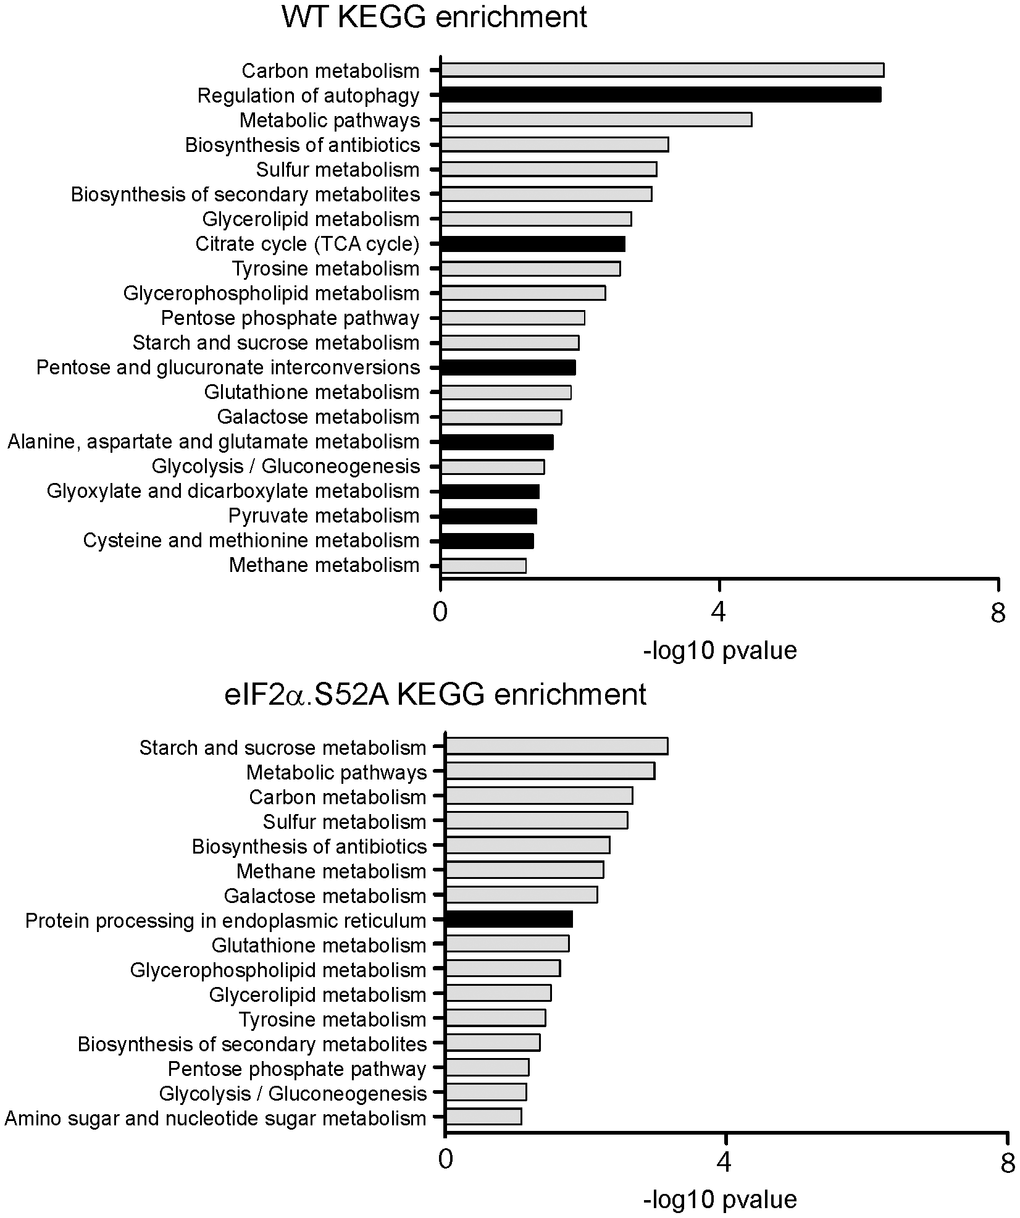 KEGG analysis of RNA-Seq data. Kyoto Encyclopedia of Genes and Genomes (KEGG) pathway enrichment analysis for up-regulated genes in wild type (WT) and eIF2α.S52A cells, according to RNA-Seq data. Dark bars denote categories enriched only in one type of cells.